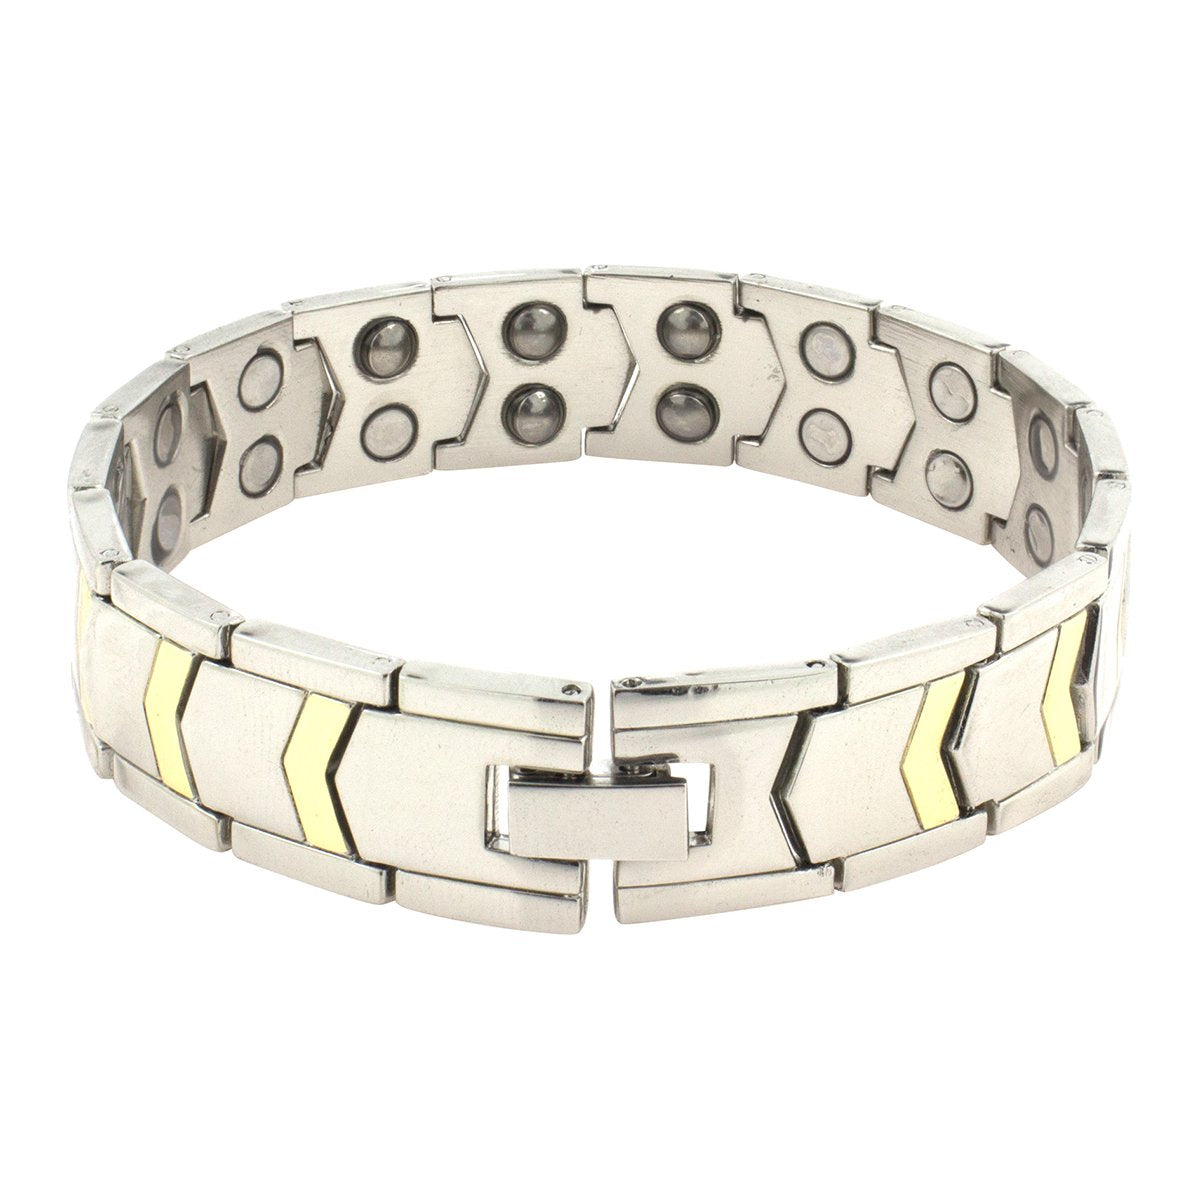 Titanium Stainless Steel Silver Gold Magnetic Therapy Health Energy Bracelet Men